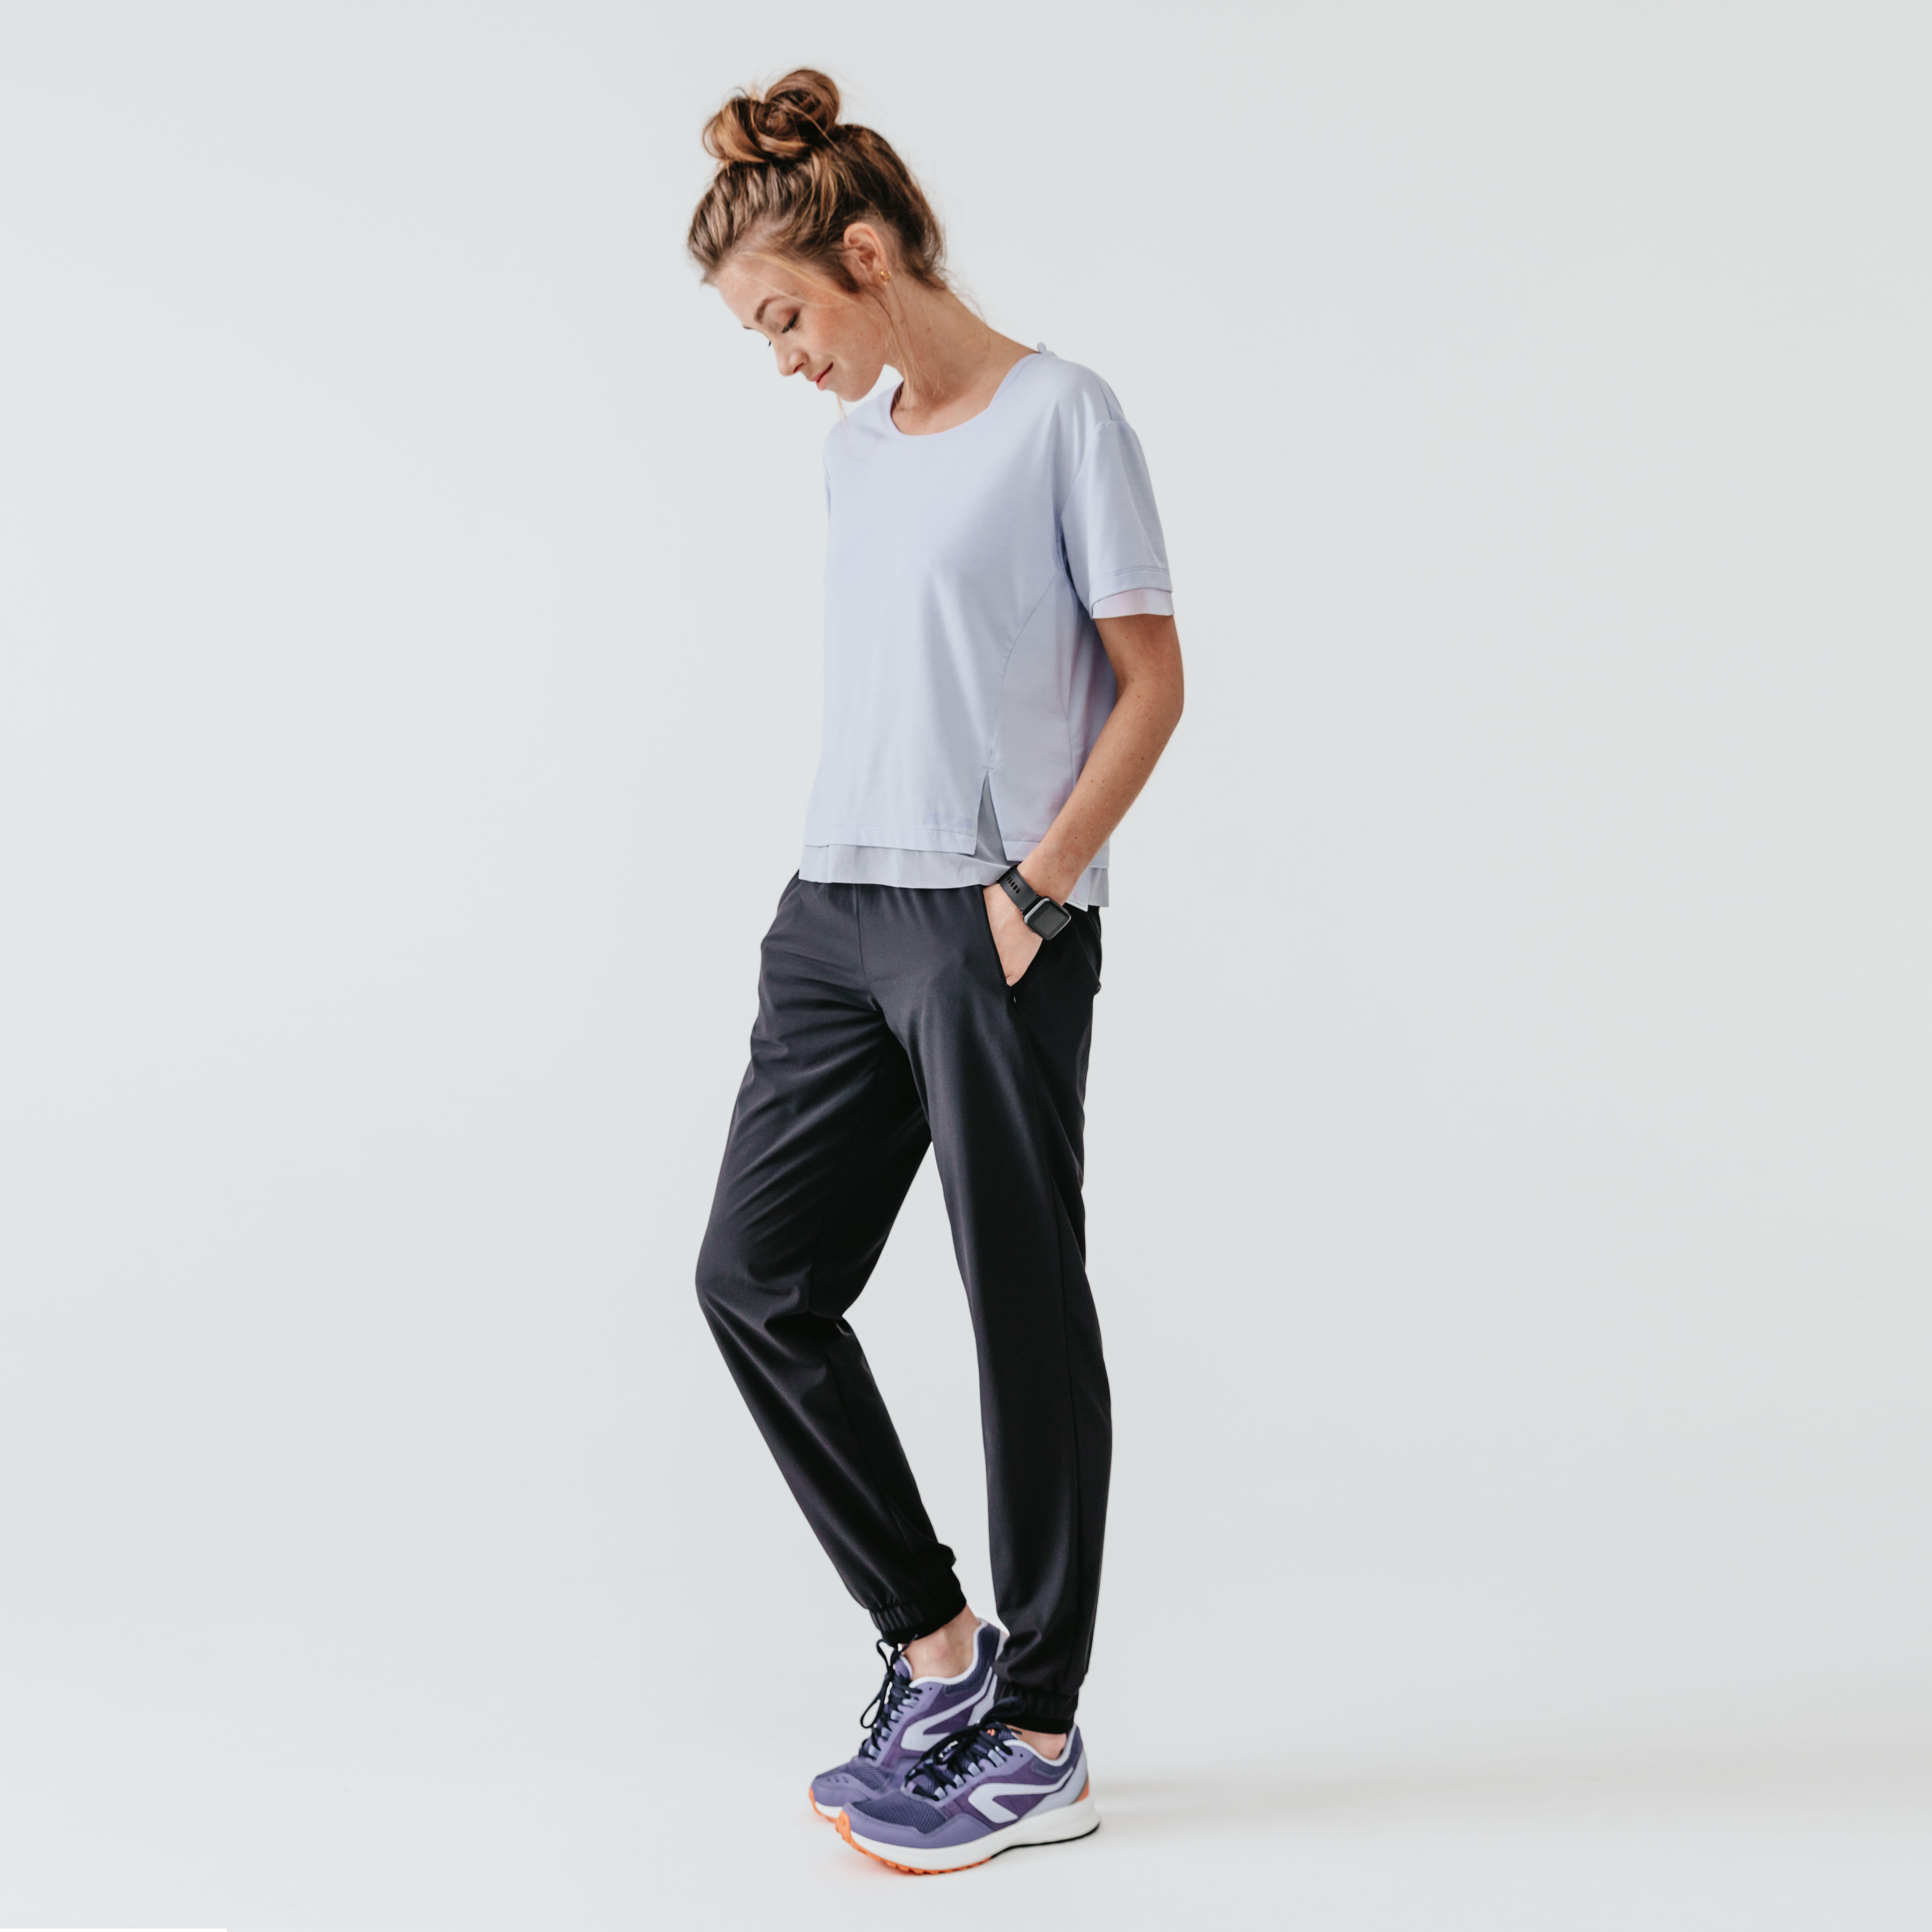 NYAMBA by Decathlon Solid Women Grey Track Pants  Buy NYAMBA by Decathlon  Solid Women Grey Track Pants Online at Best Prices in India  Flipkartcom